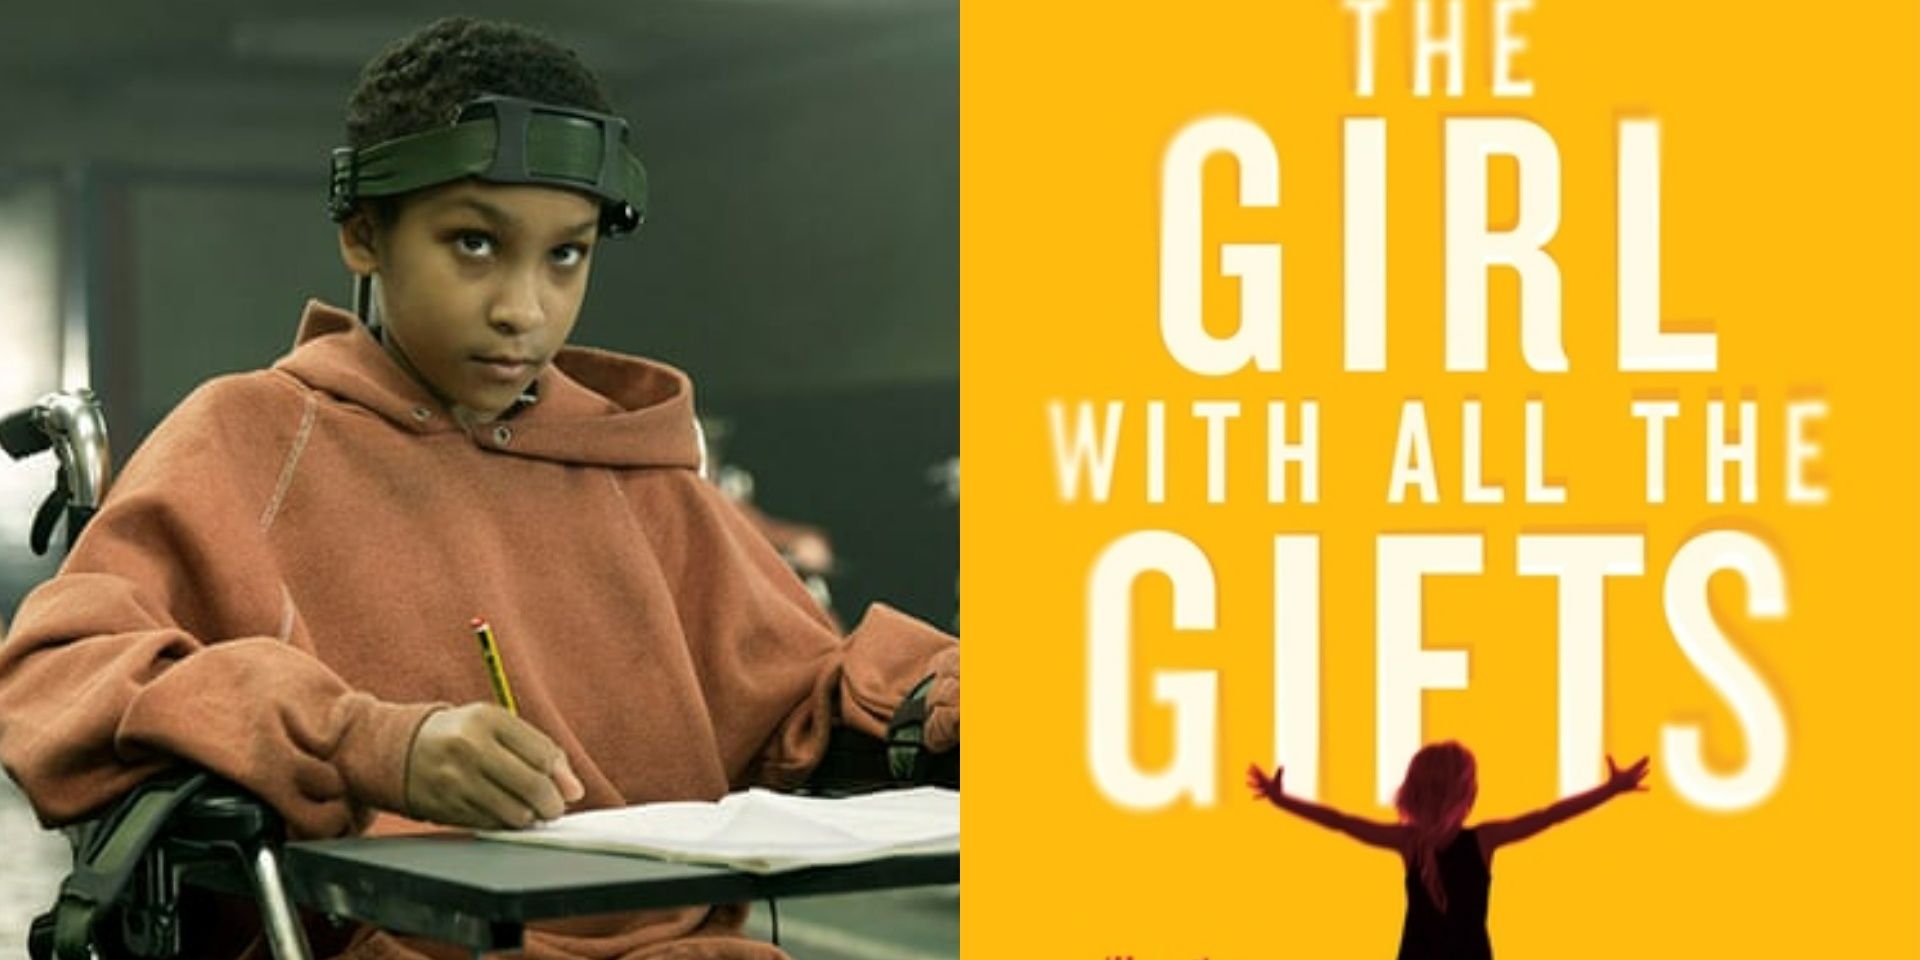 (Left) Melanie restrained in a wheelchair / (Right) The Girl with All the Gifts book cover